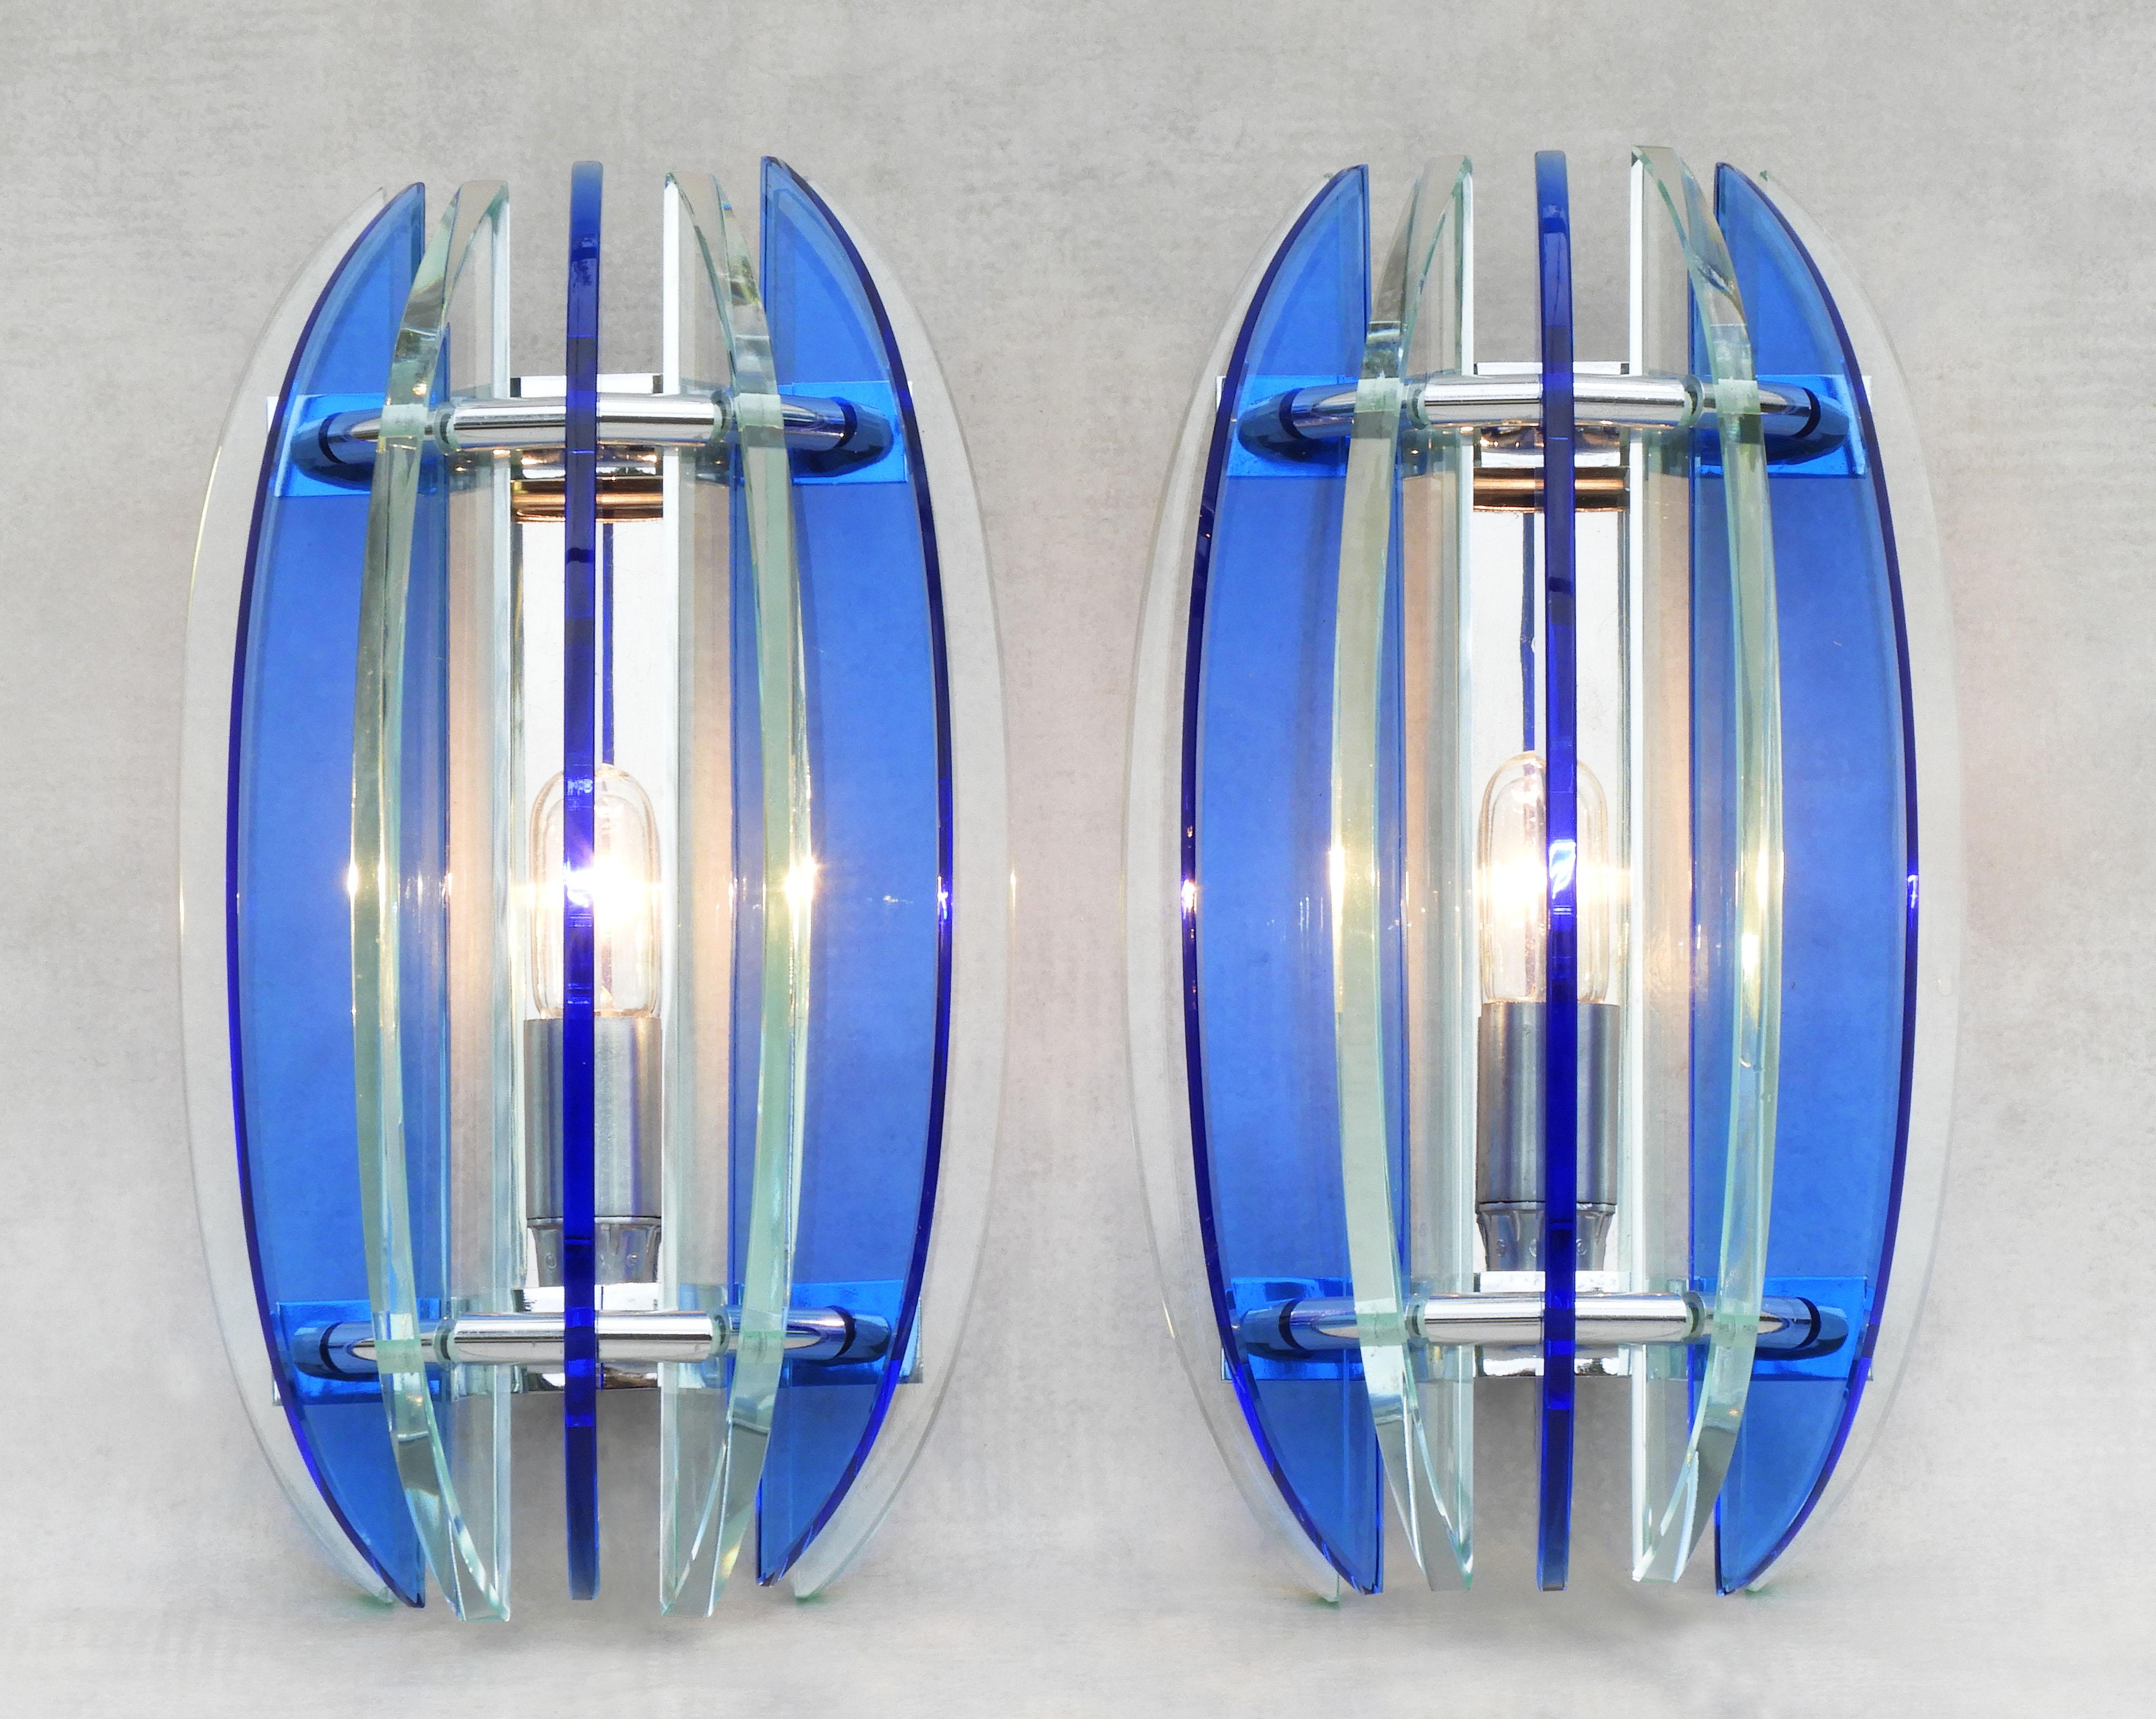 Pair of Veca glass wall lights mid century Italy, circa 1970

Two mid-century wall light sconces from Italian lighting company Veca.
Seven alternating blue and clear/pale green glass crescents in a semicircular form on a chromed frame structure.  In